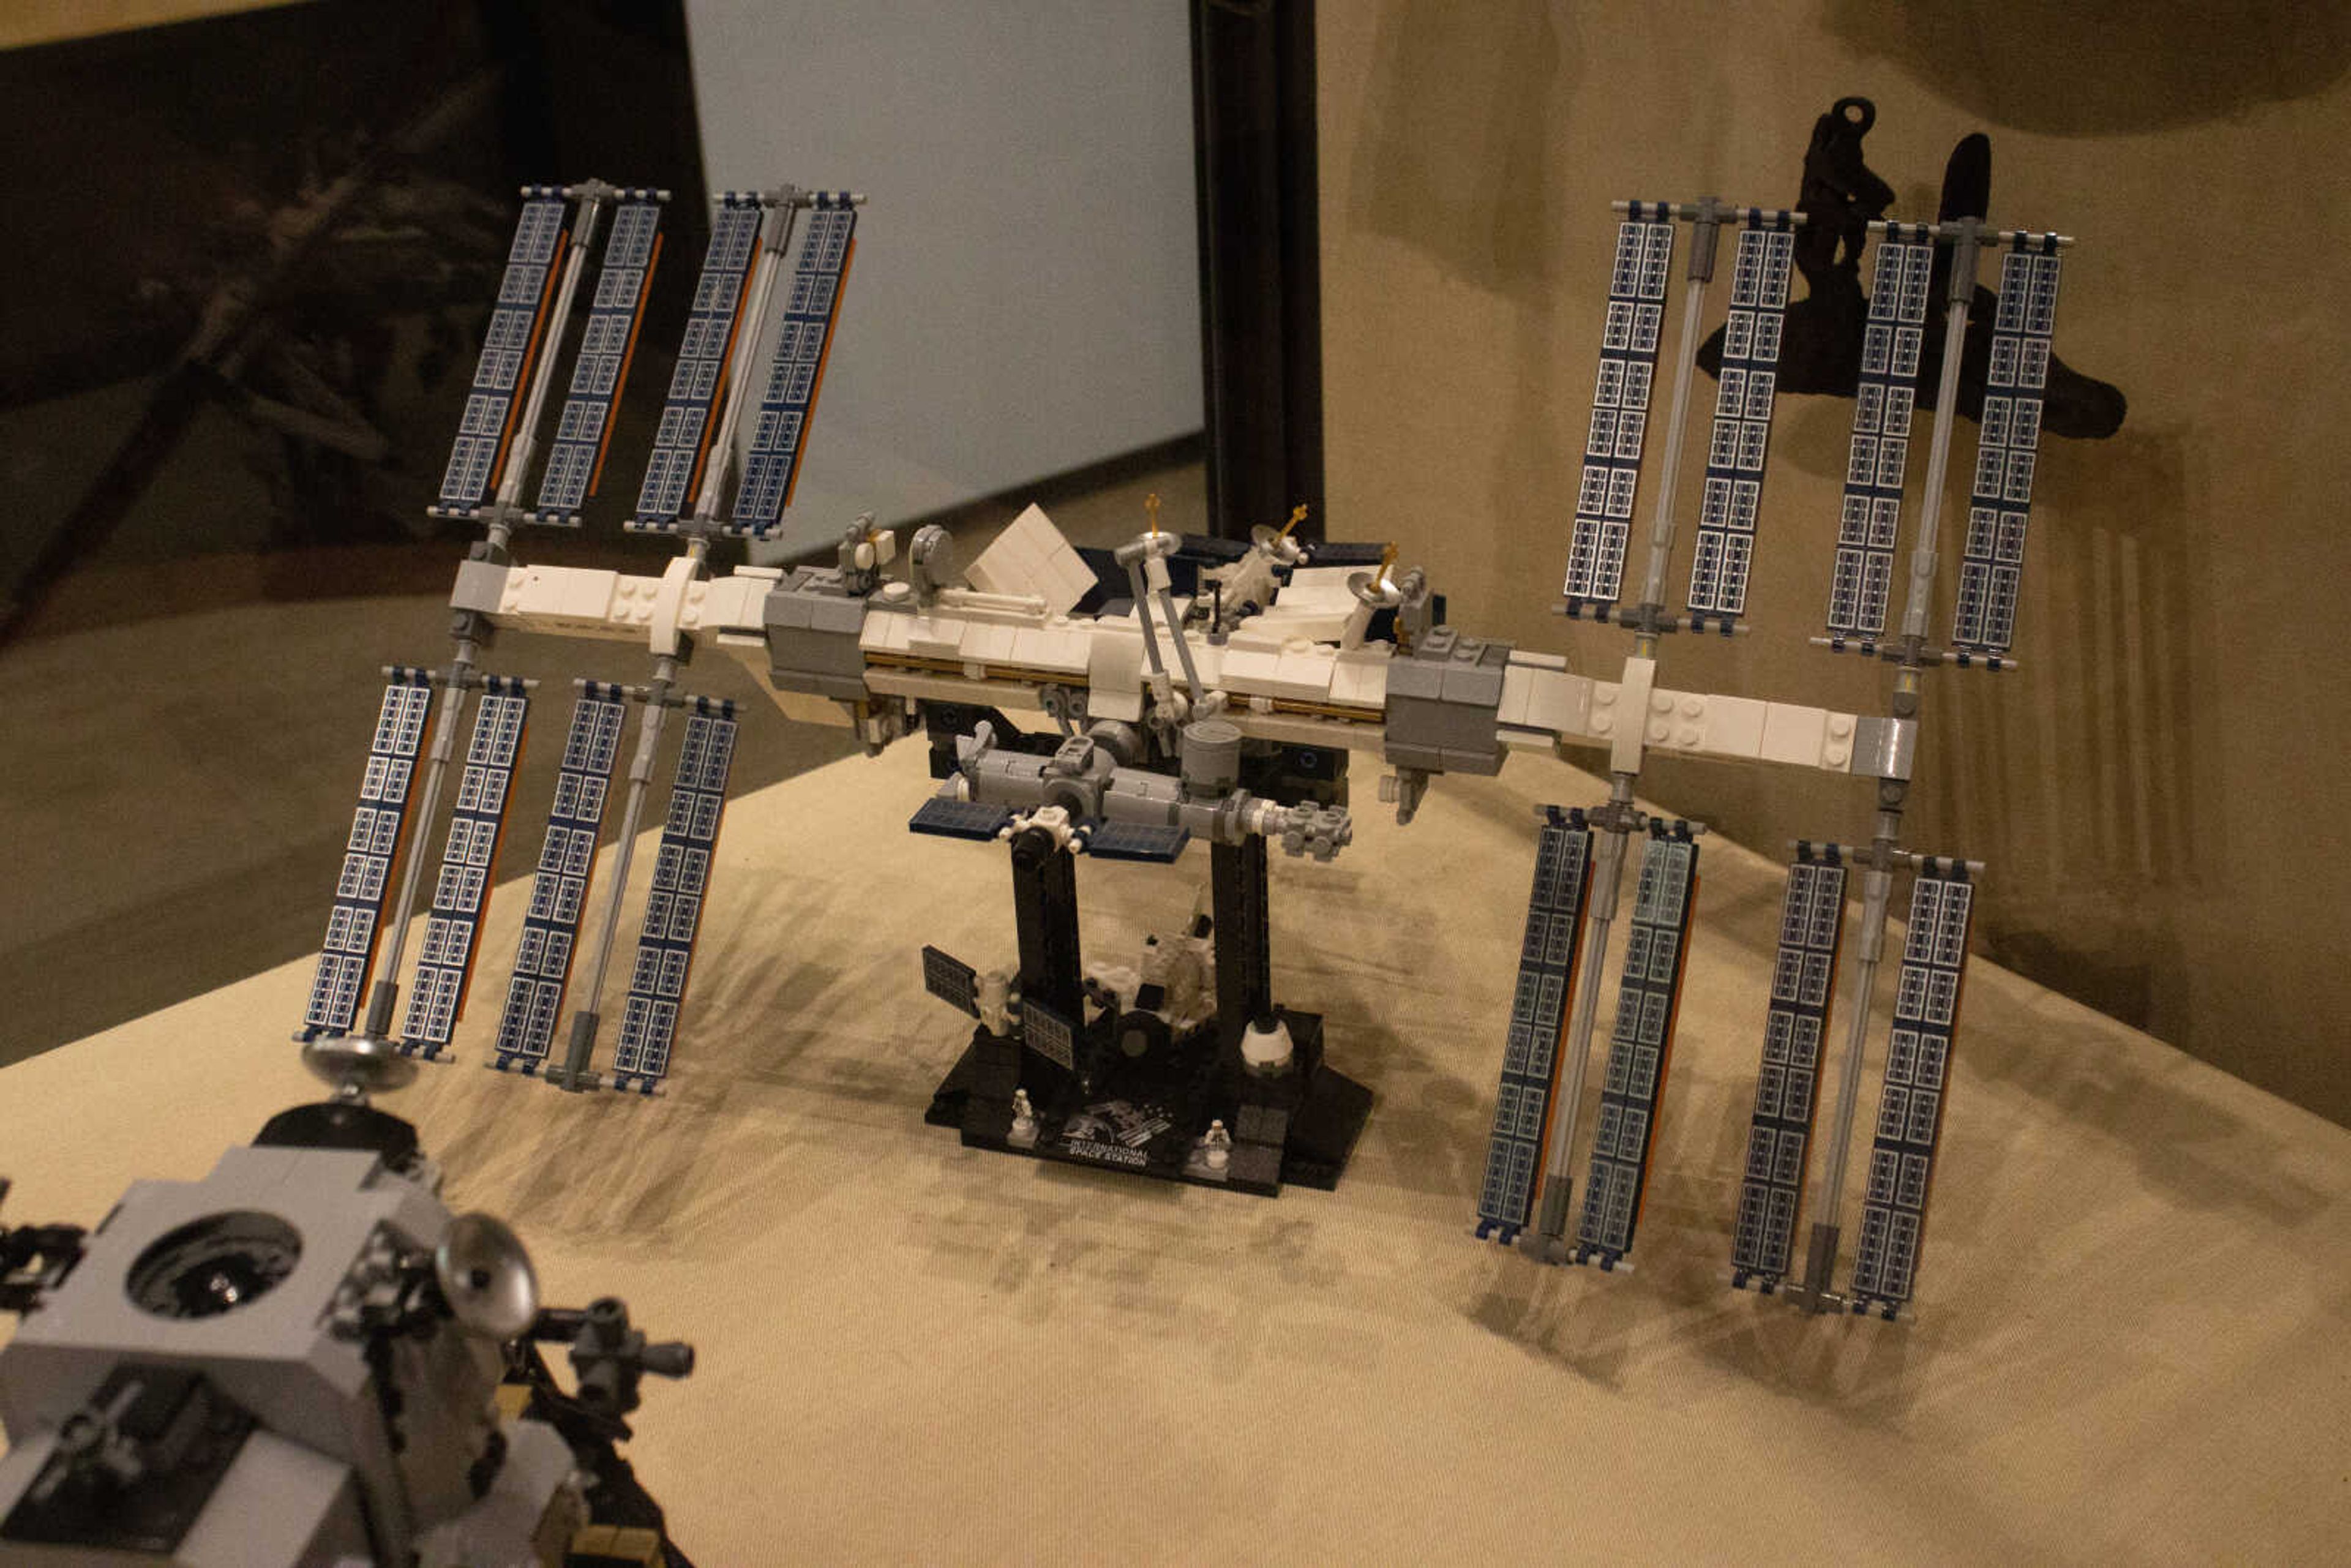 A Lego build of the International Space Station is on display in the Crisp Museum. This space station contains 864 individual pieces.